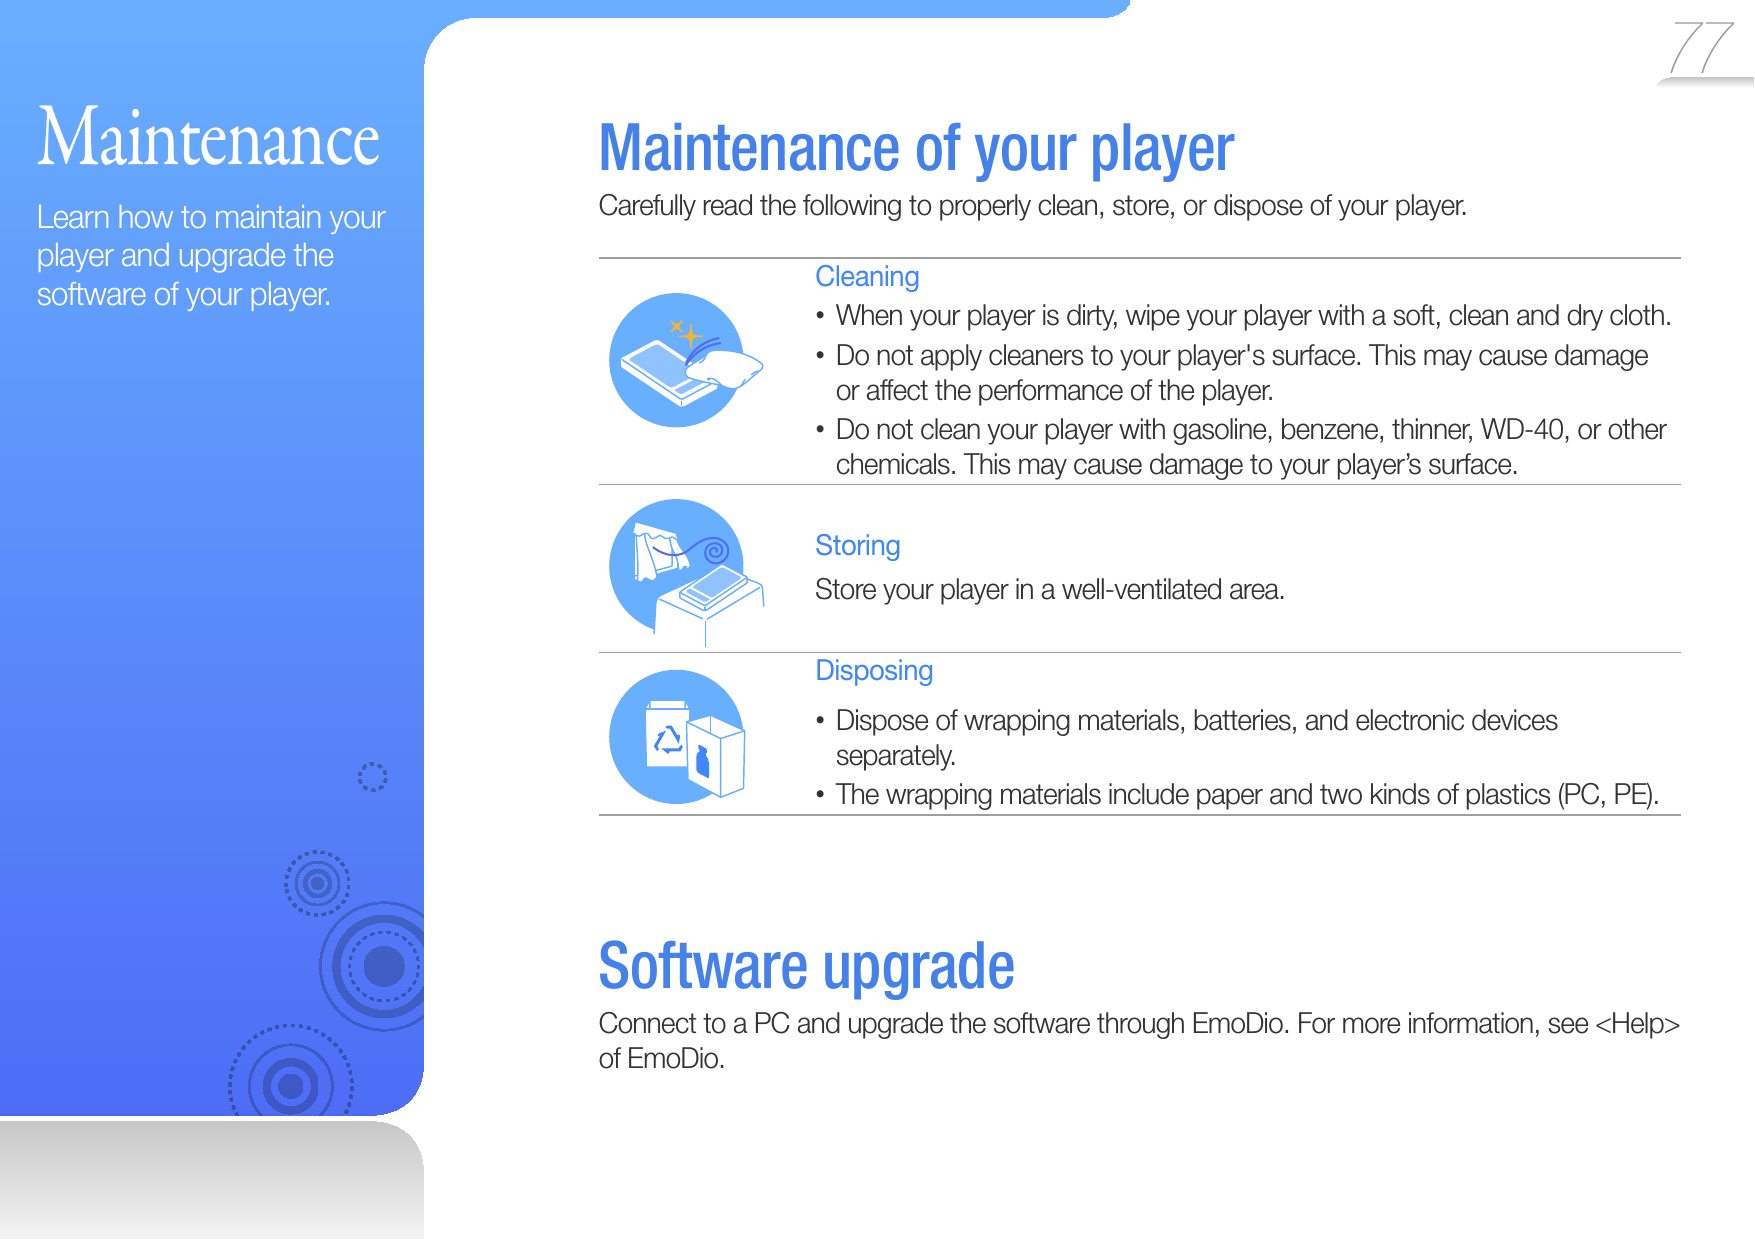 77 MaintenanceLearn how to maintain your player and upgrade the software of your player. Maintenance of your playerCarefully read the following to properly clean, store, or dispose of your player.CleaningWhen your player is dirty, wipe your player with a soft, clean and dry cloth.• Do not apply cleaners to your player&apos;s surface. This may cause damage • or affect the performance of the player.Do not clean your player with gasoline, benzene, thinner, WD-40, or other • chemicals. This may cause damage to your player’s surface.StoringStore your player in a well-ventilated area.DisposingDispose of wrapping materials, batteries, and electronic devices • separately.The wrapping materials include paper and two kinds of plastics (PC, PE).•  Software  upgradeConnect to a PC and upgrade the software through EmoDio. For more information, see &lt;Help&gt; of EmoDio.